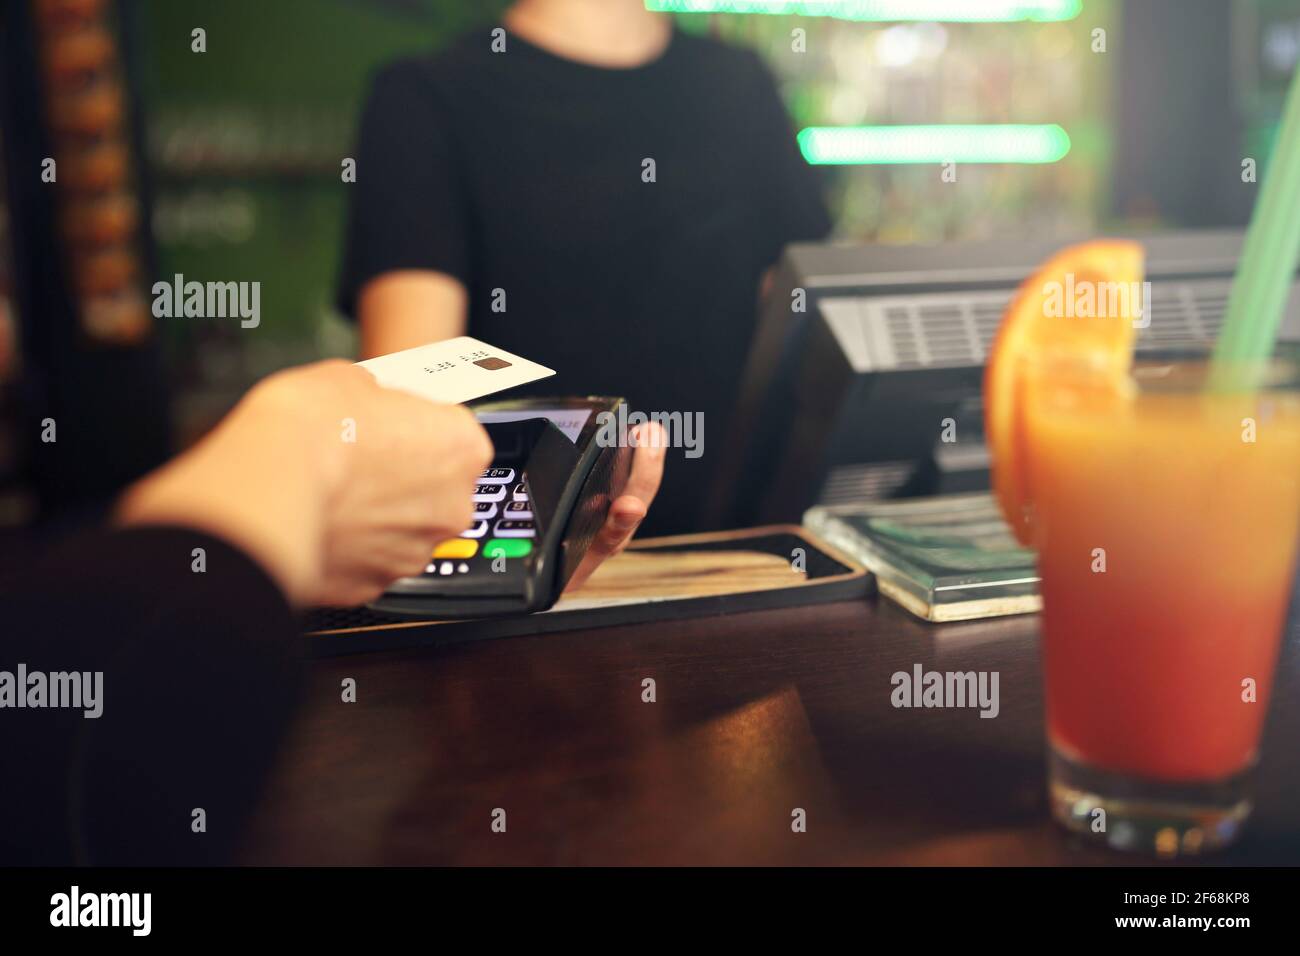 Payment by card. The woman pays the bill at the bar with a payment card. Stock Photo